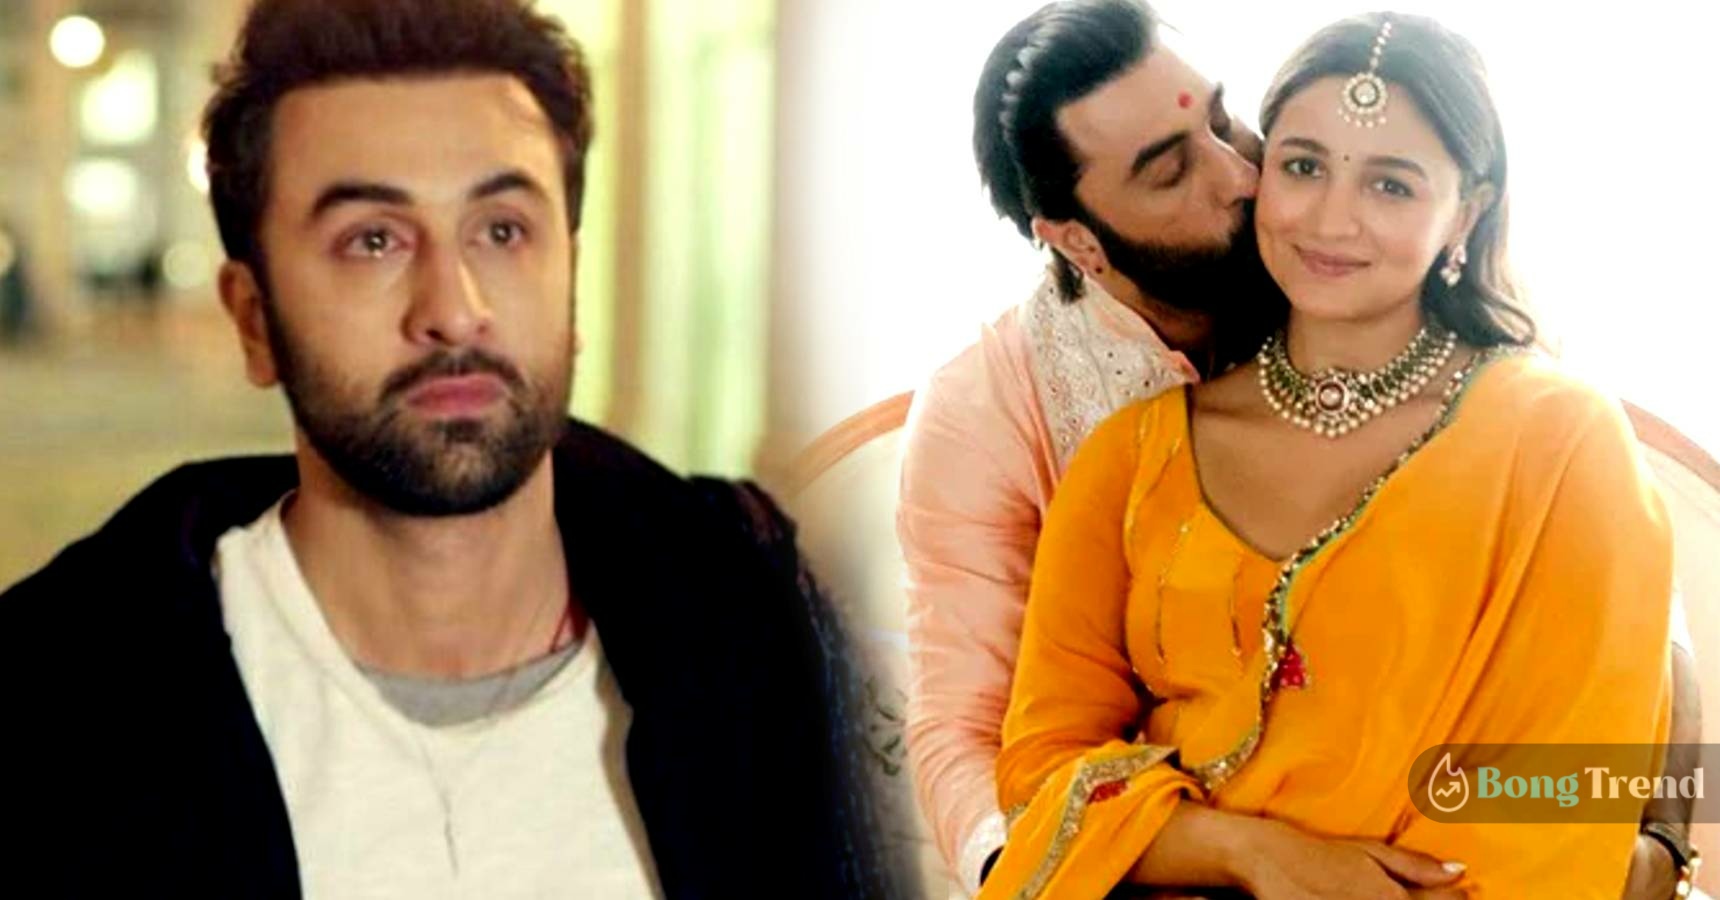 Bollywood actor Ranbir Kapoor reportedly started crying after holding her daughter for the first time